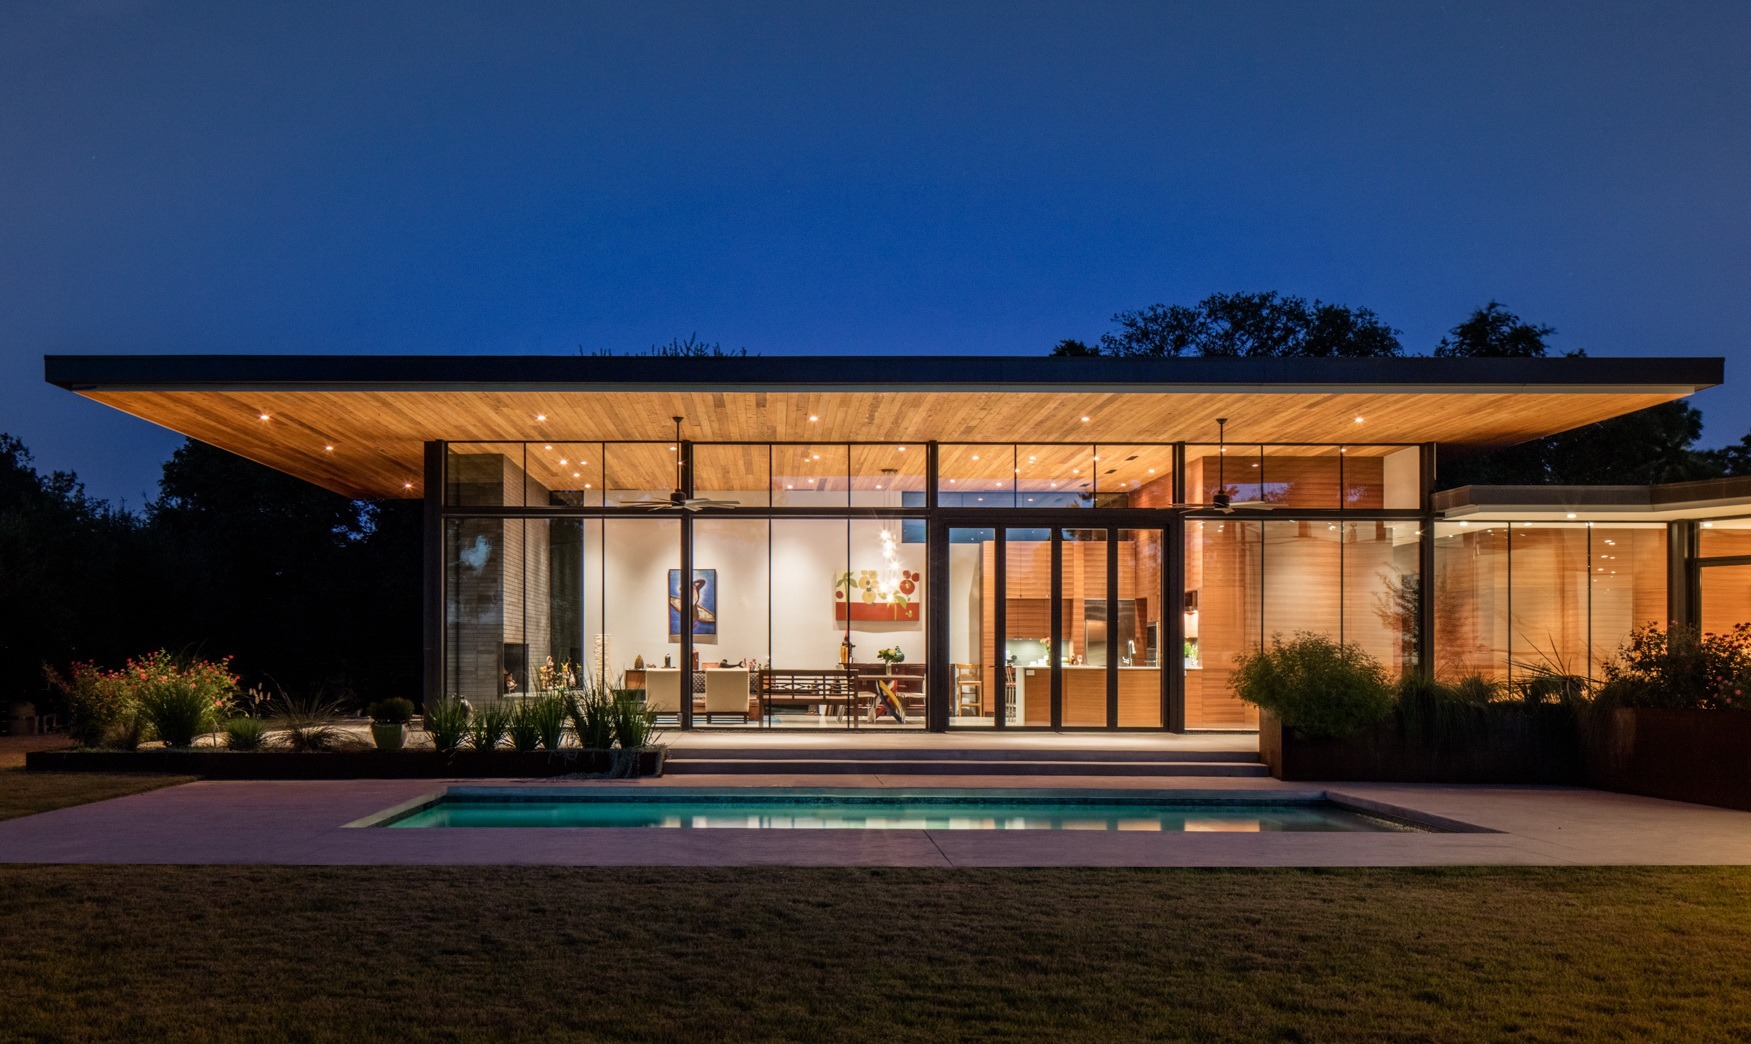 Residential architecture of a modern glass house with an in-ground pool outside.